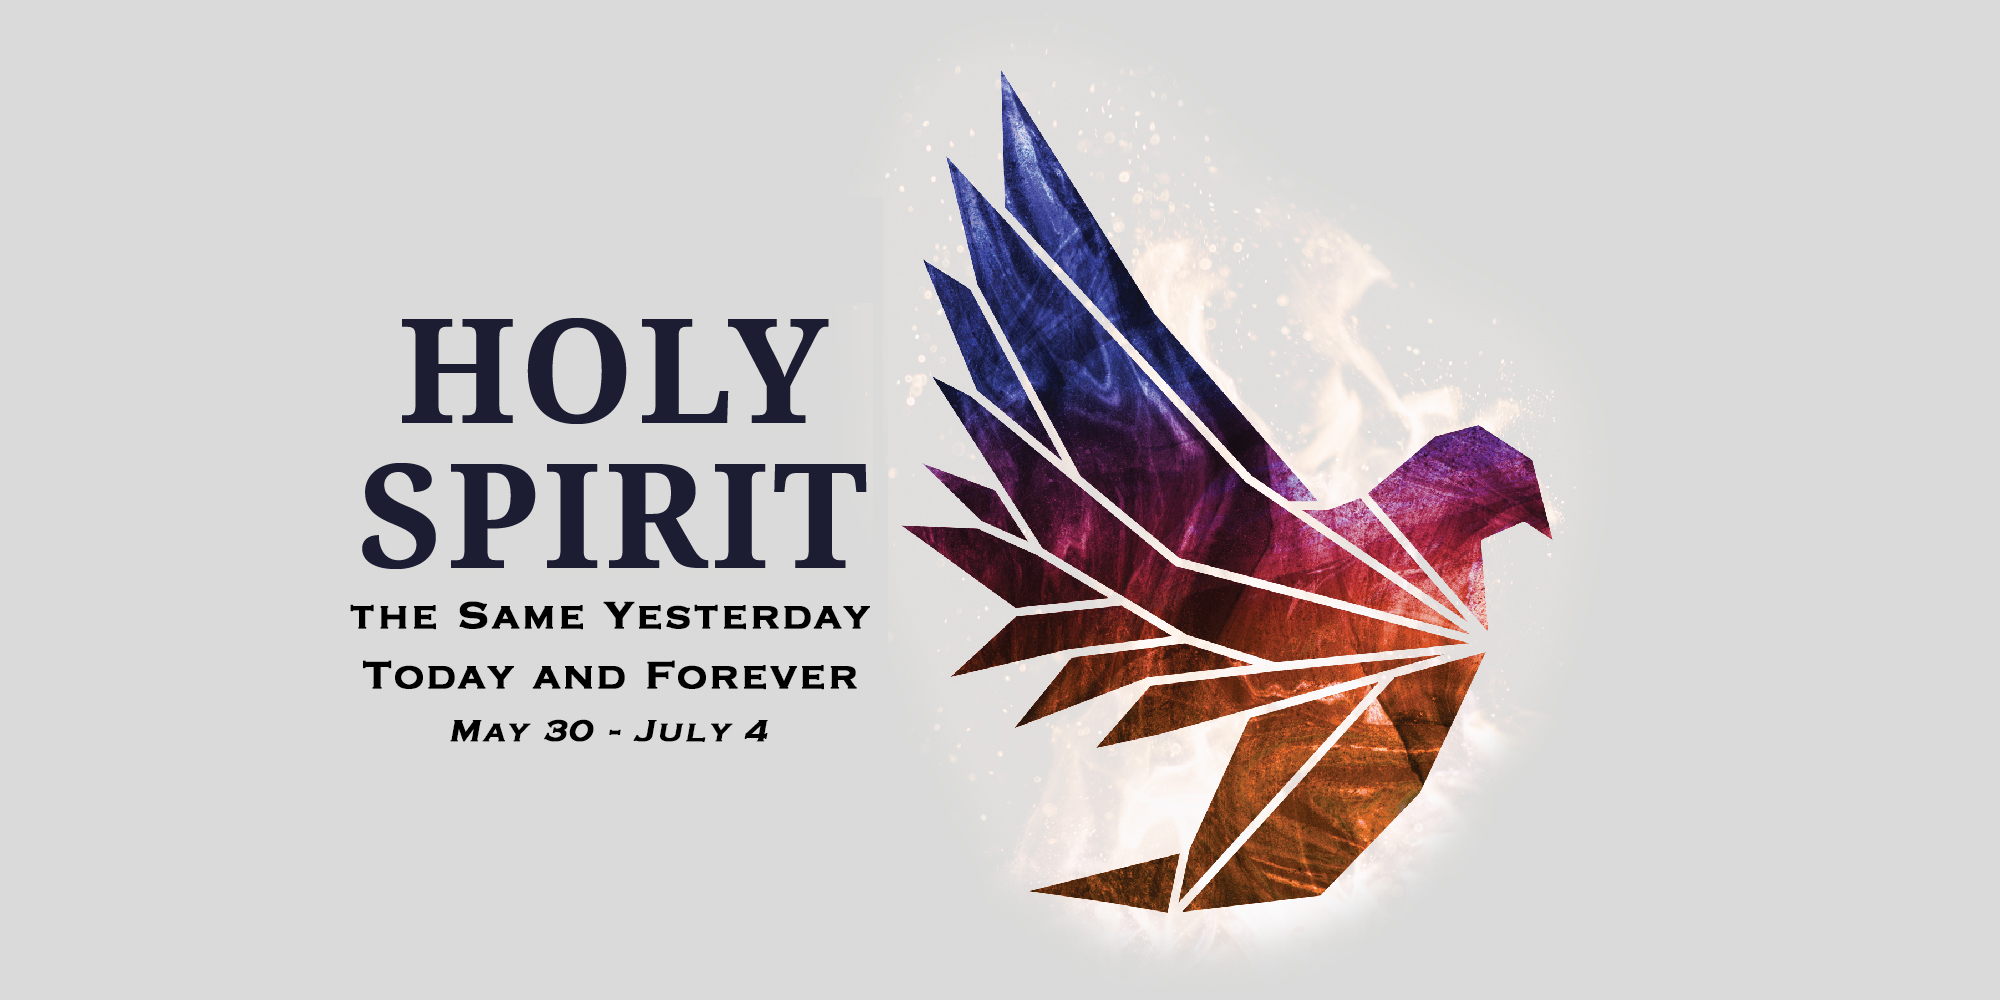 The Holy Spirit Within You